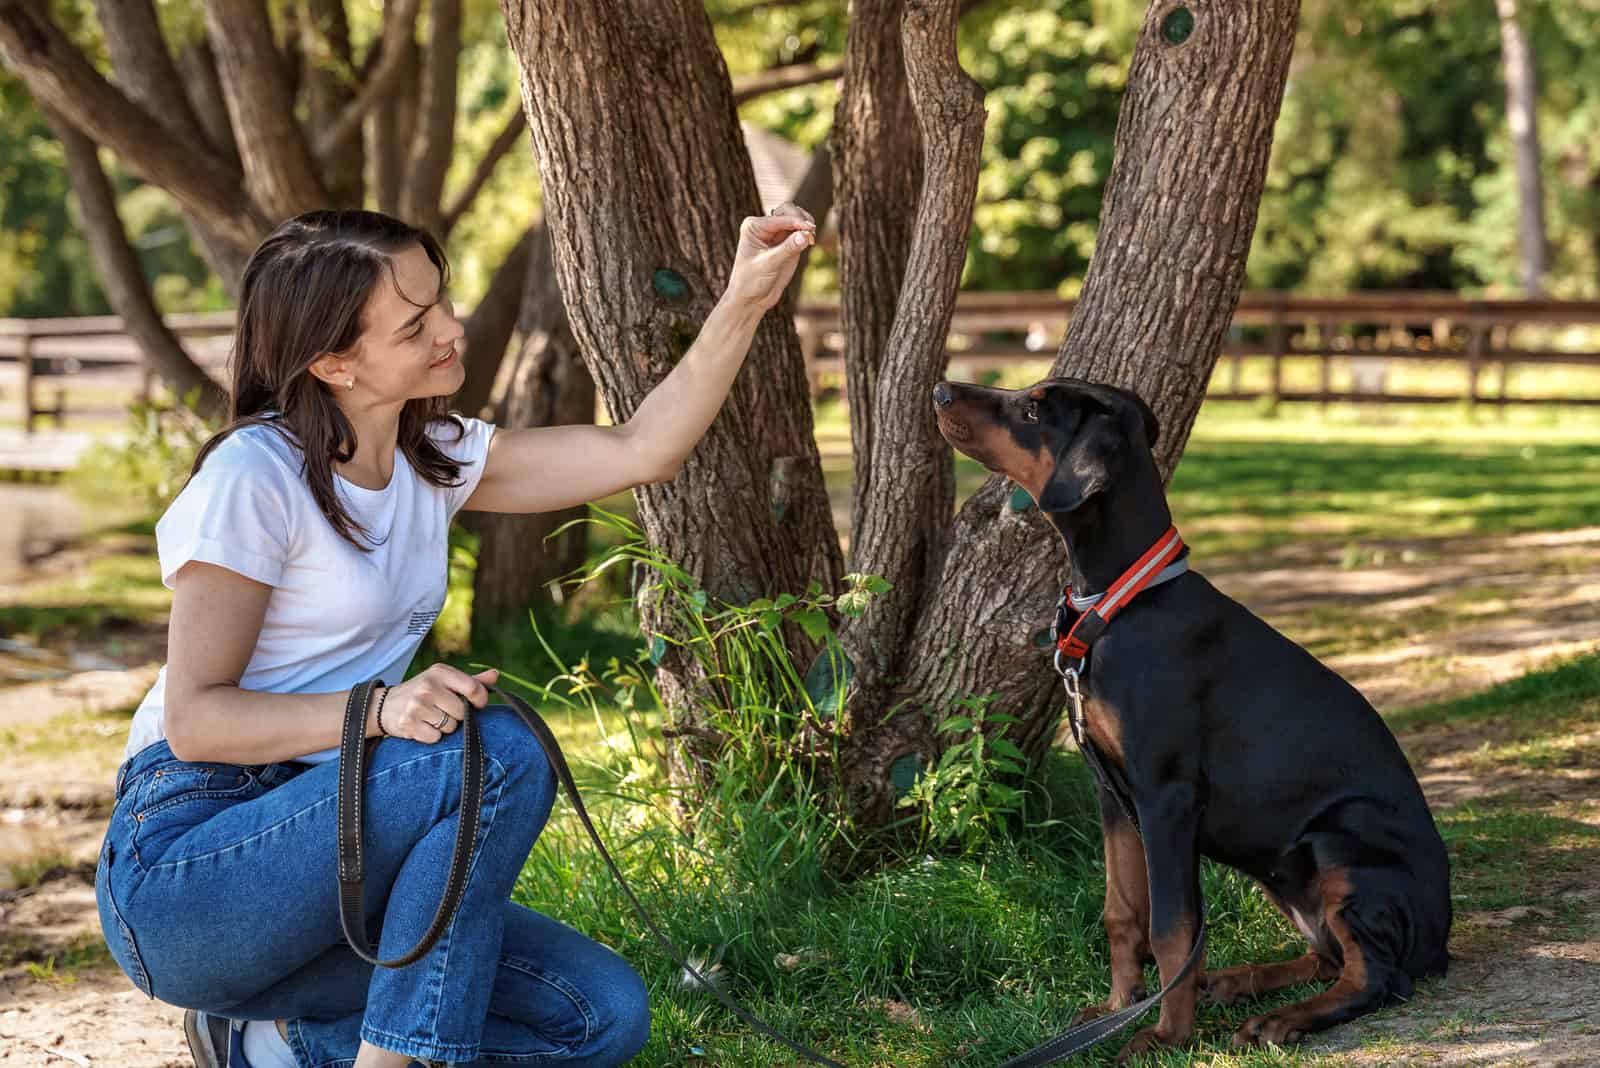 the woman gives food from the hand to the doberman as he sits